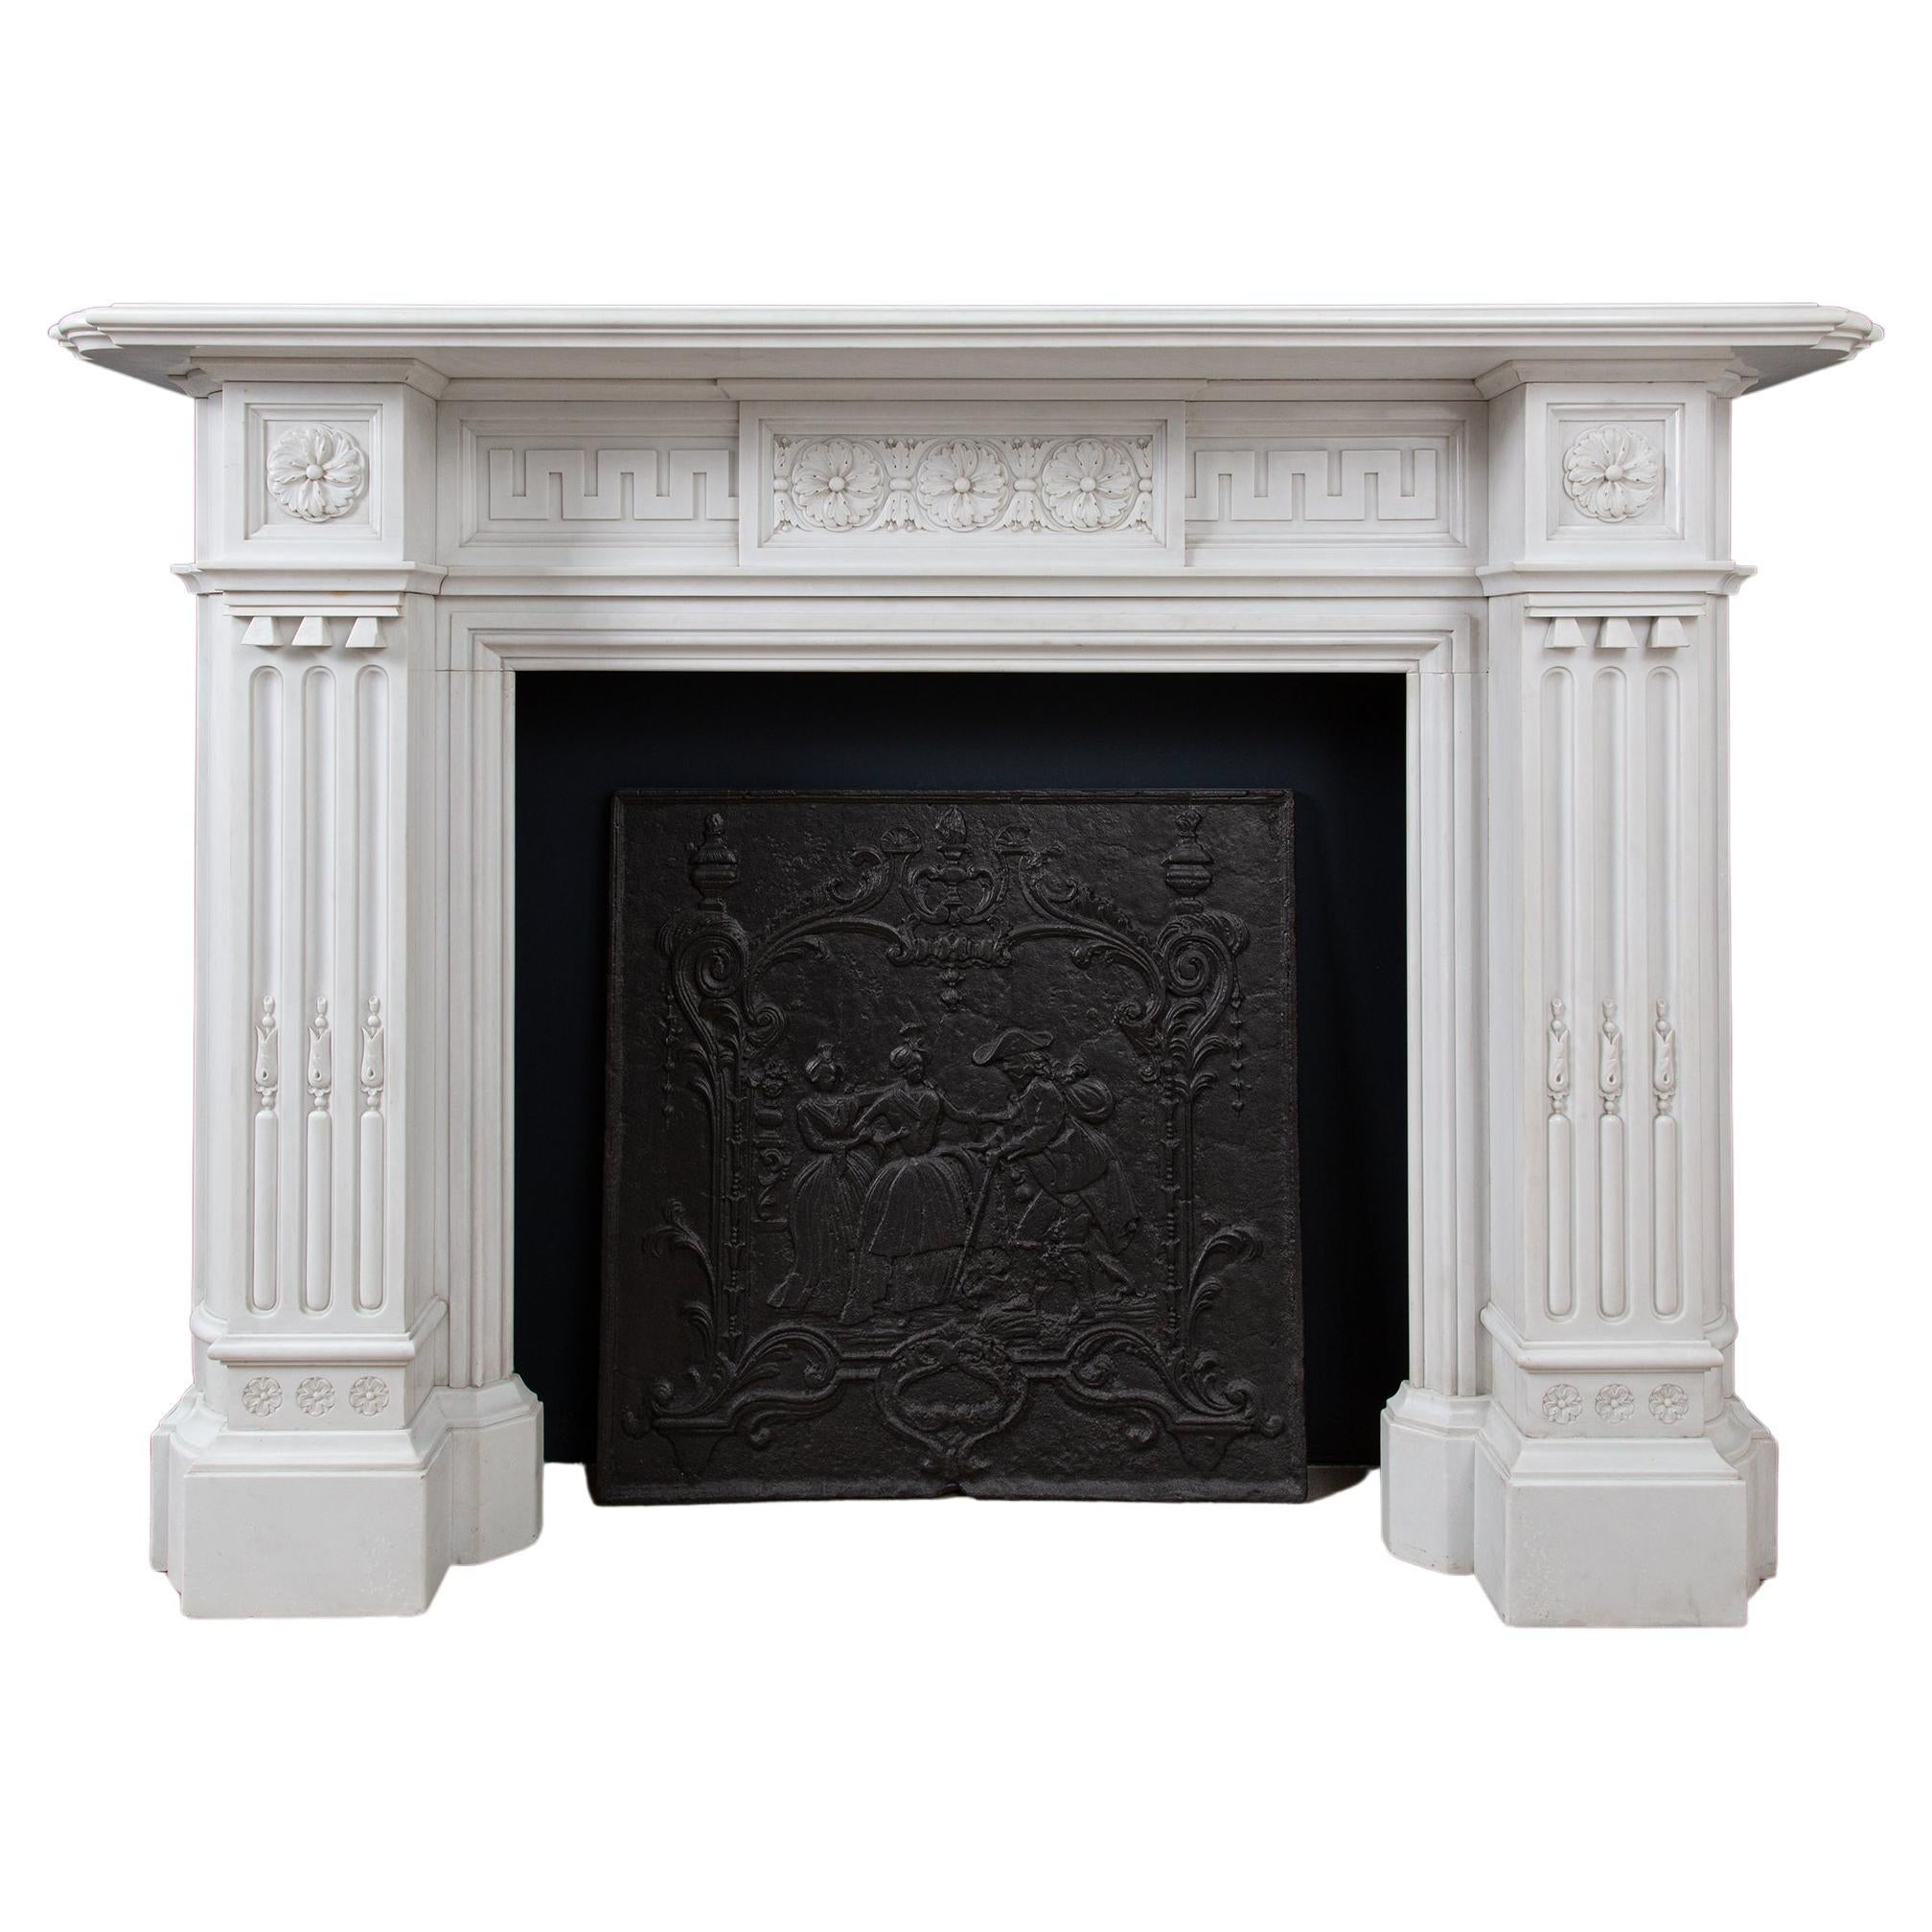 Very Rare Exceptional Statuary Clear White Marble Antique Fireplace Surround For Sale